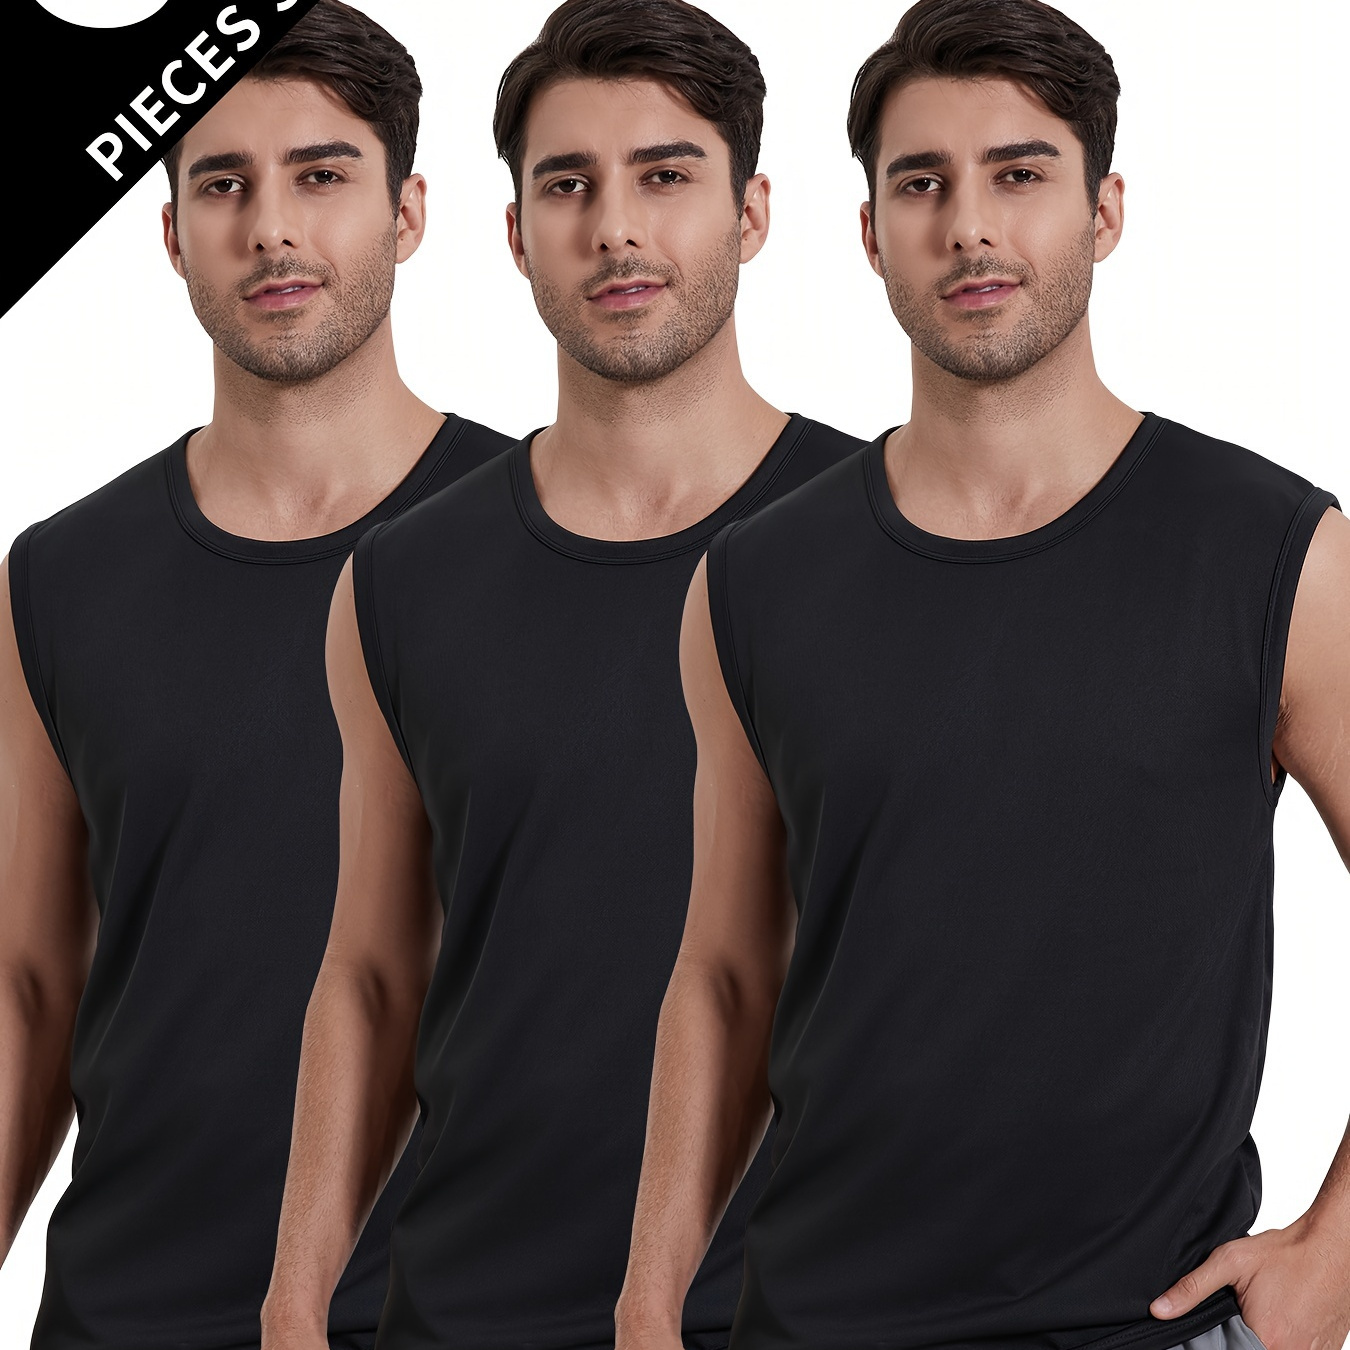 

3pcs Men's Quick Dry Moisture-wicking Breathable Tank Tops, Athletic Gym Bodybuilding Sports Sleeveless Shirts, Men's Top For Workout Running Training Basketball Playing, Men's Clothing